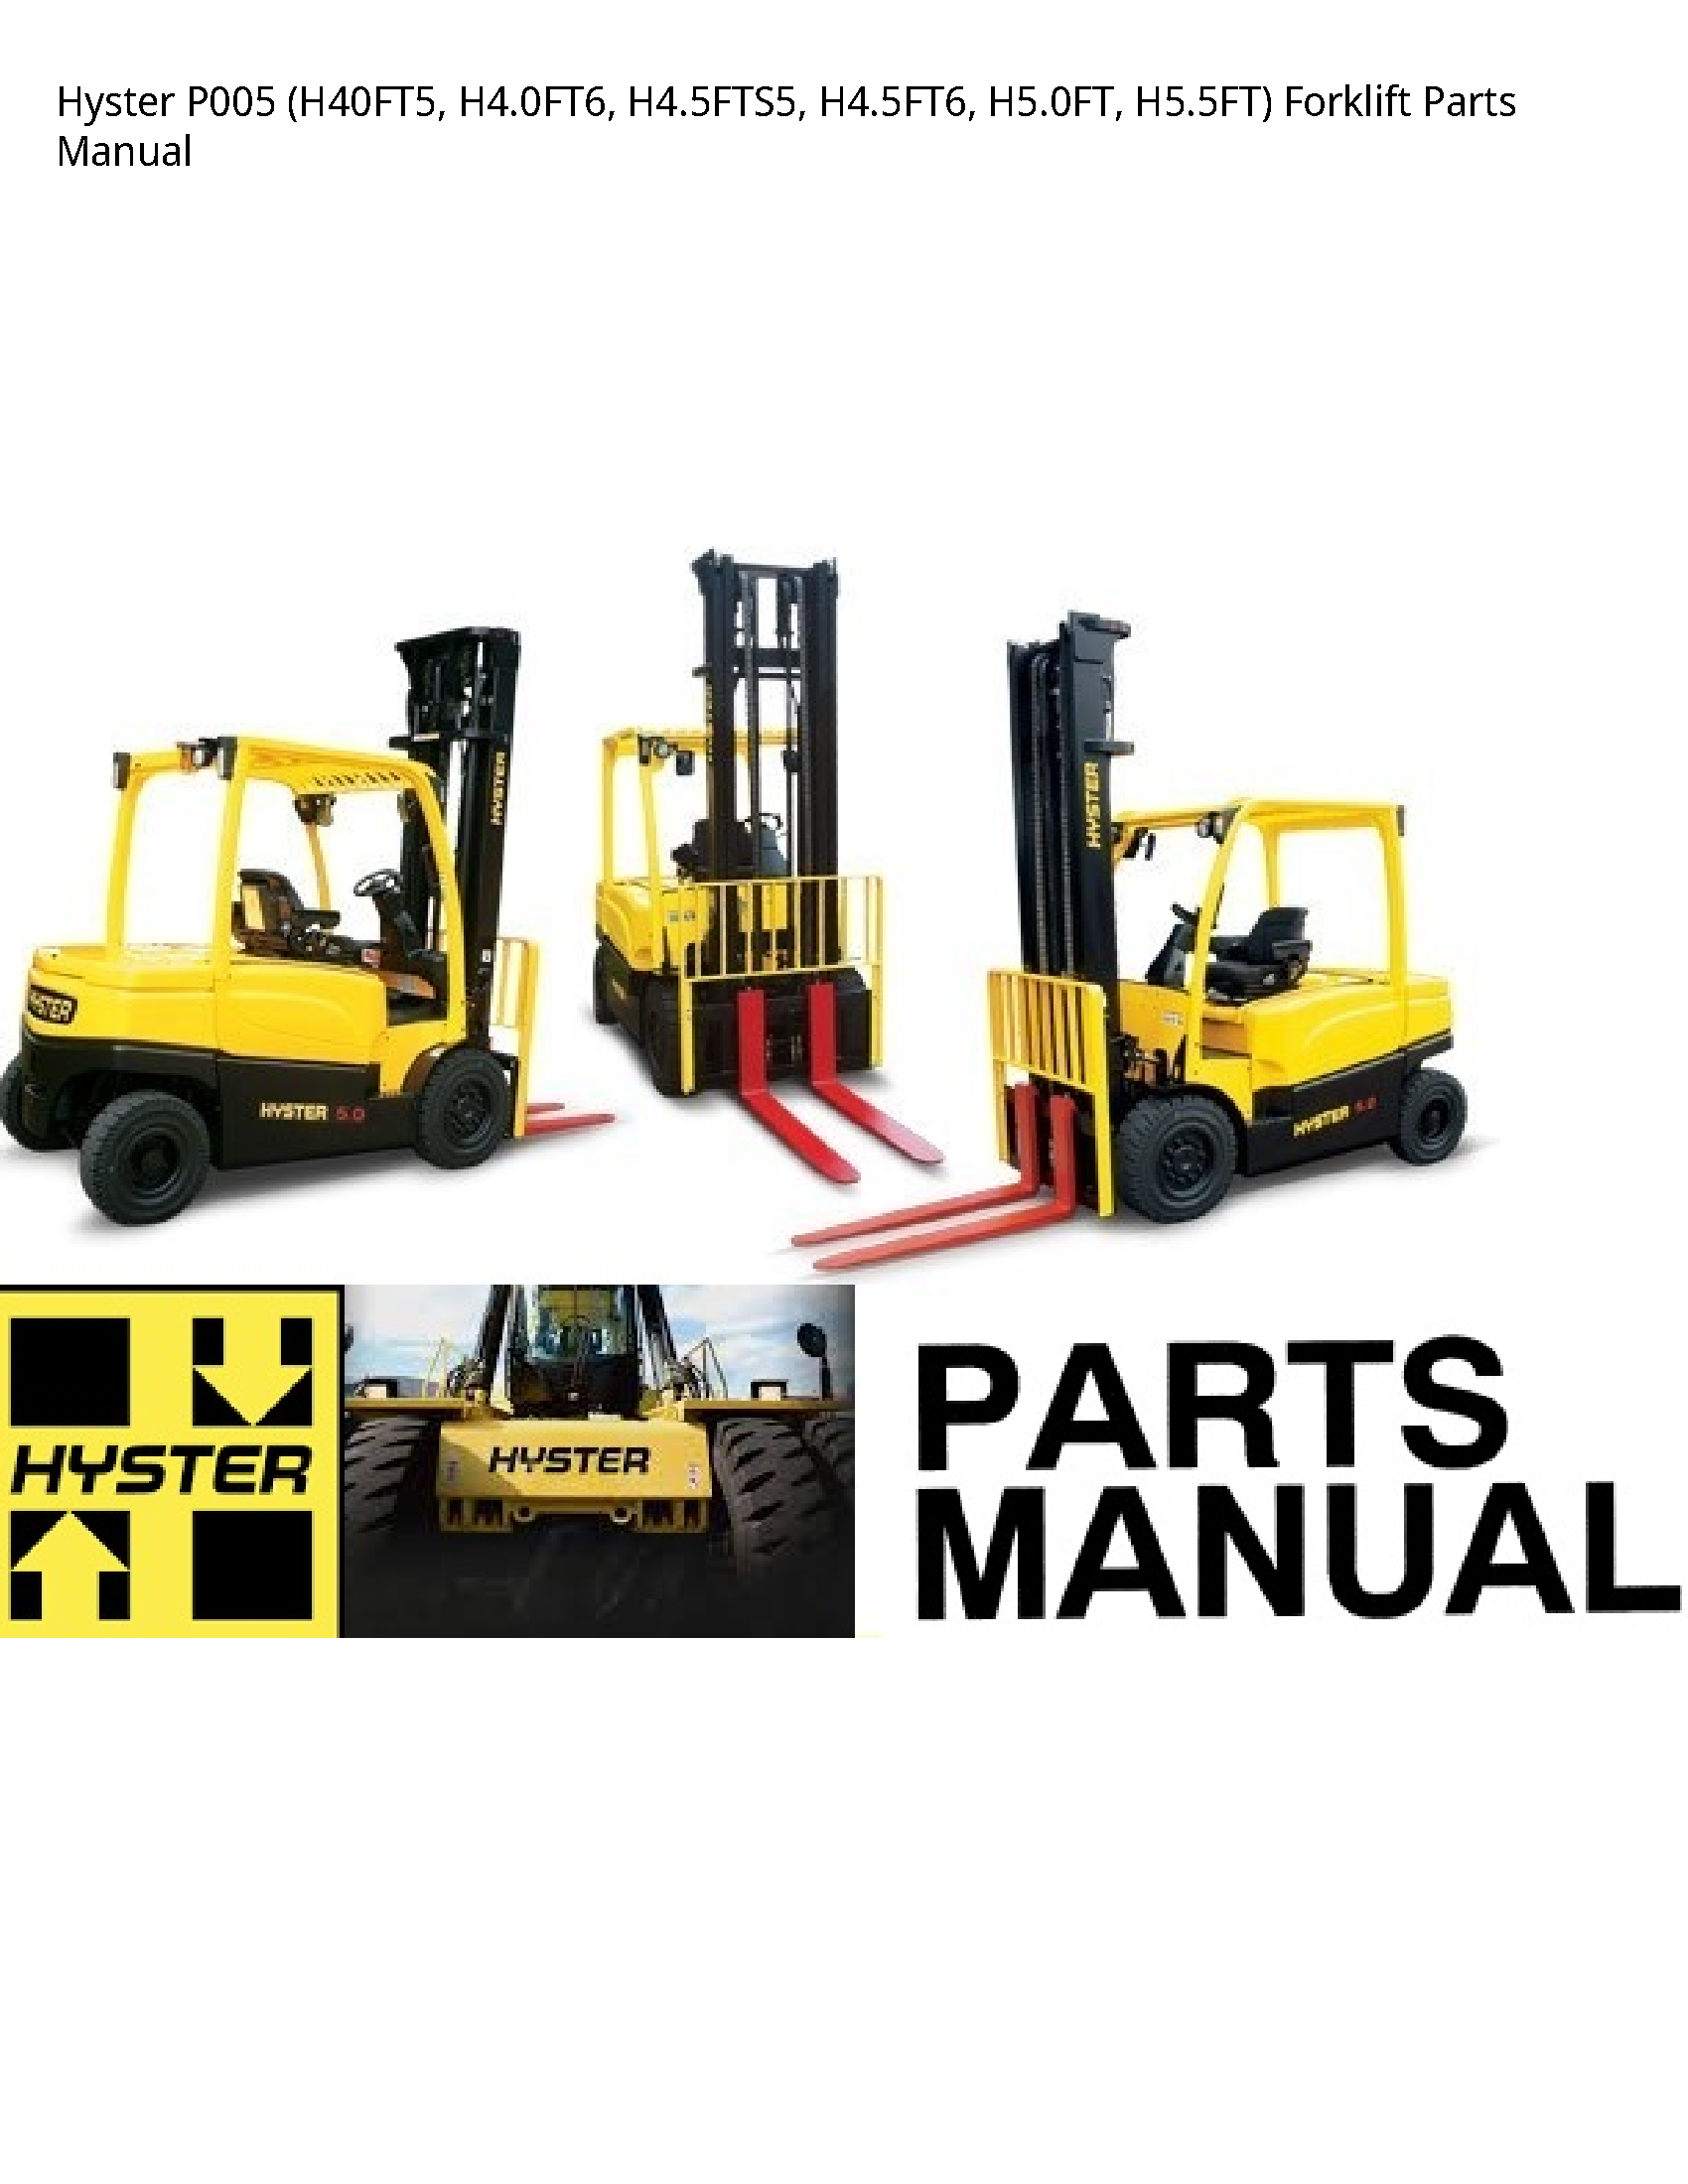 Hyster P005 Forklift Parts manual